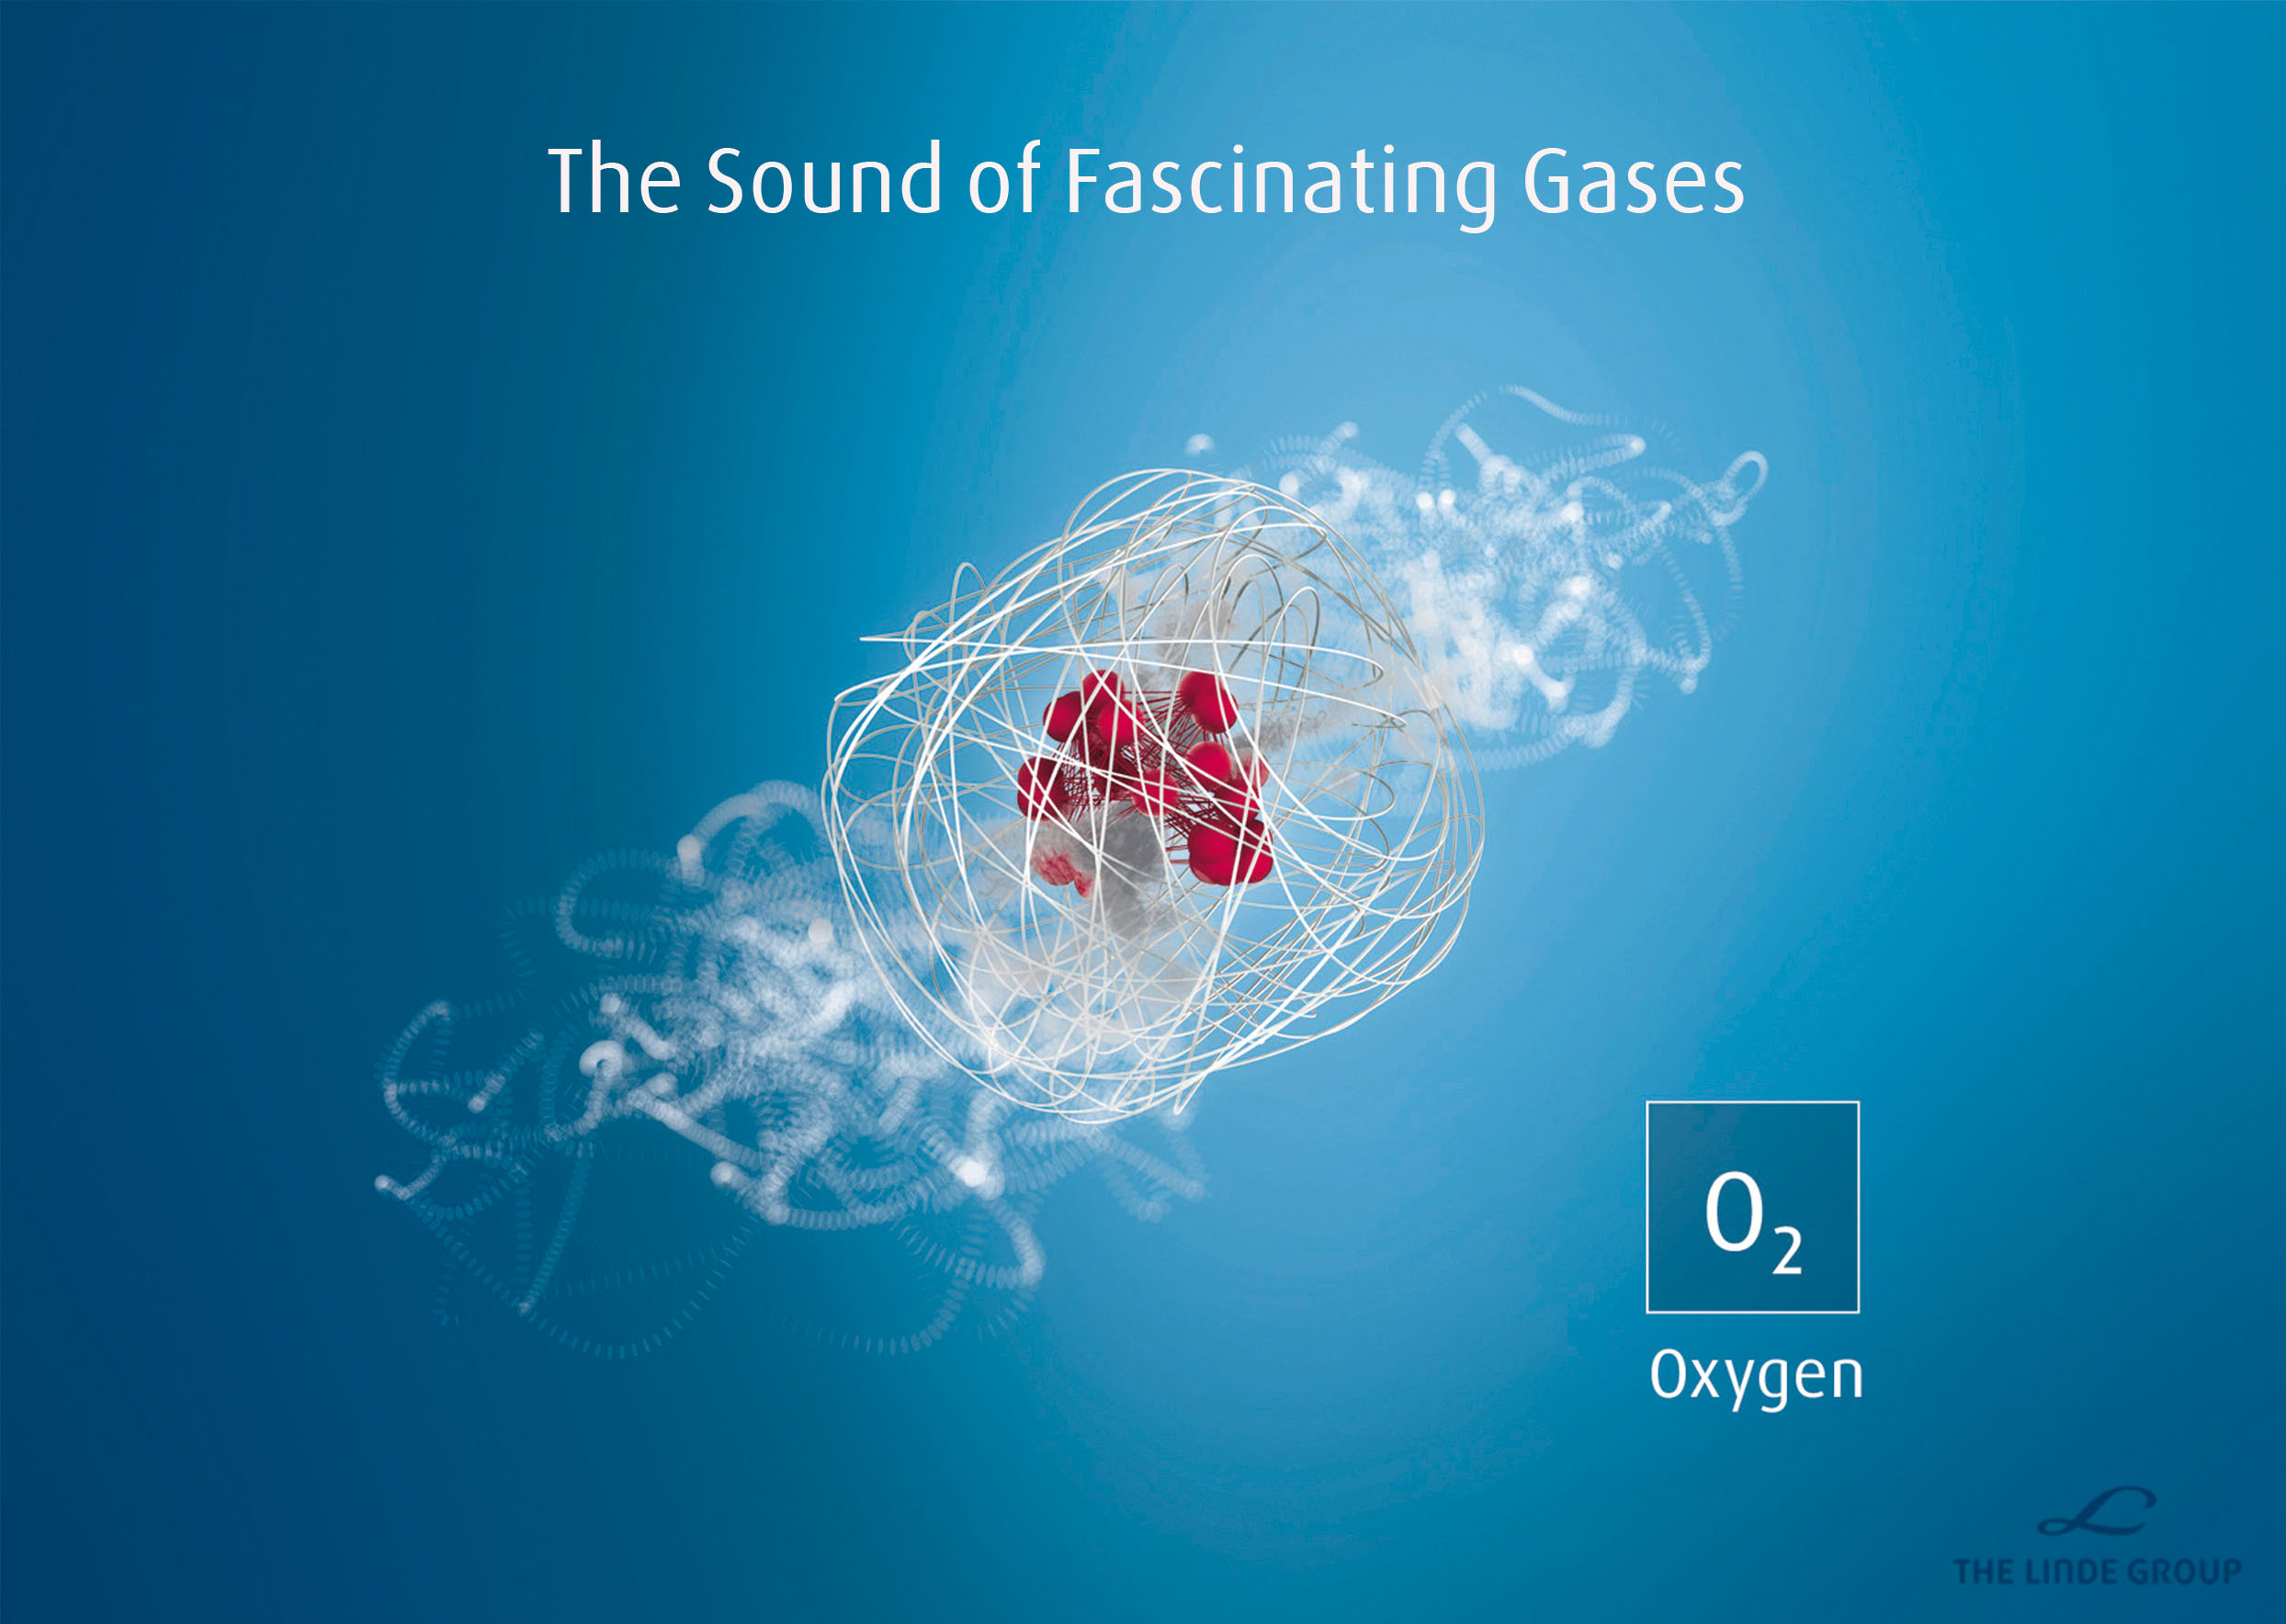 The Sound of Fascinating Gases